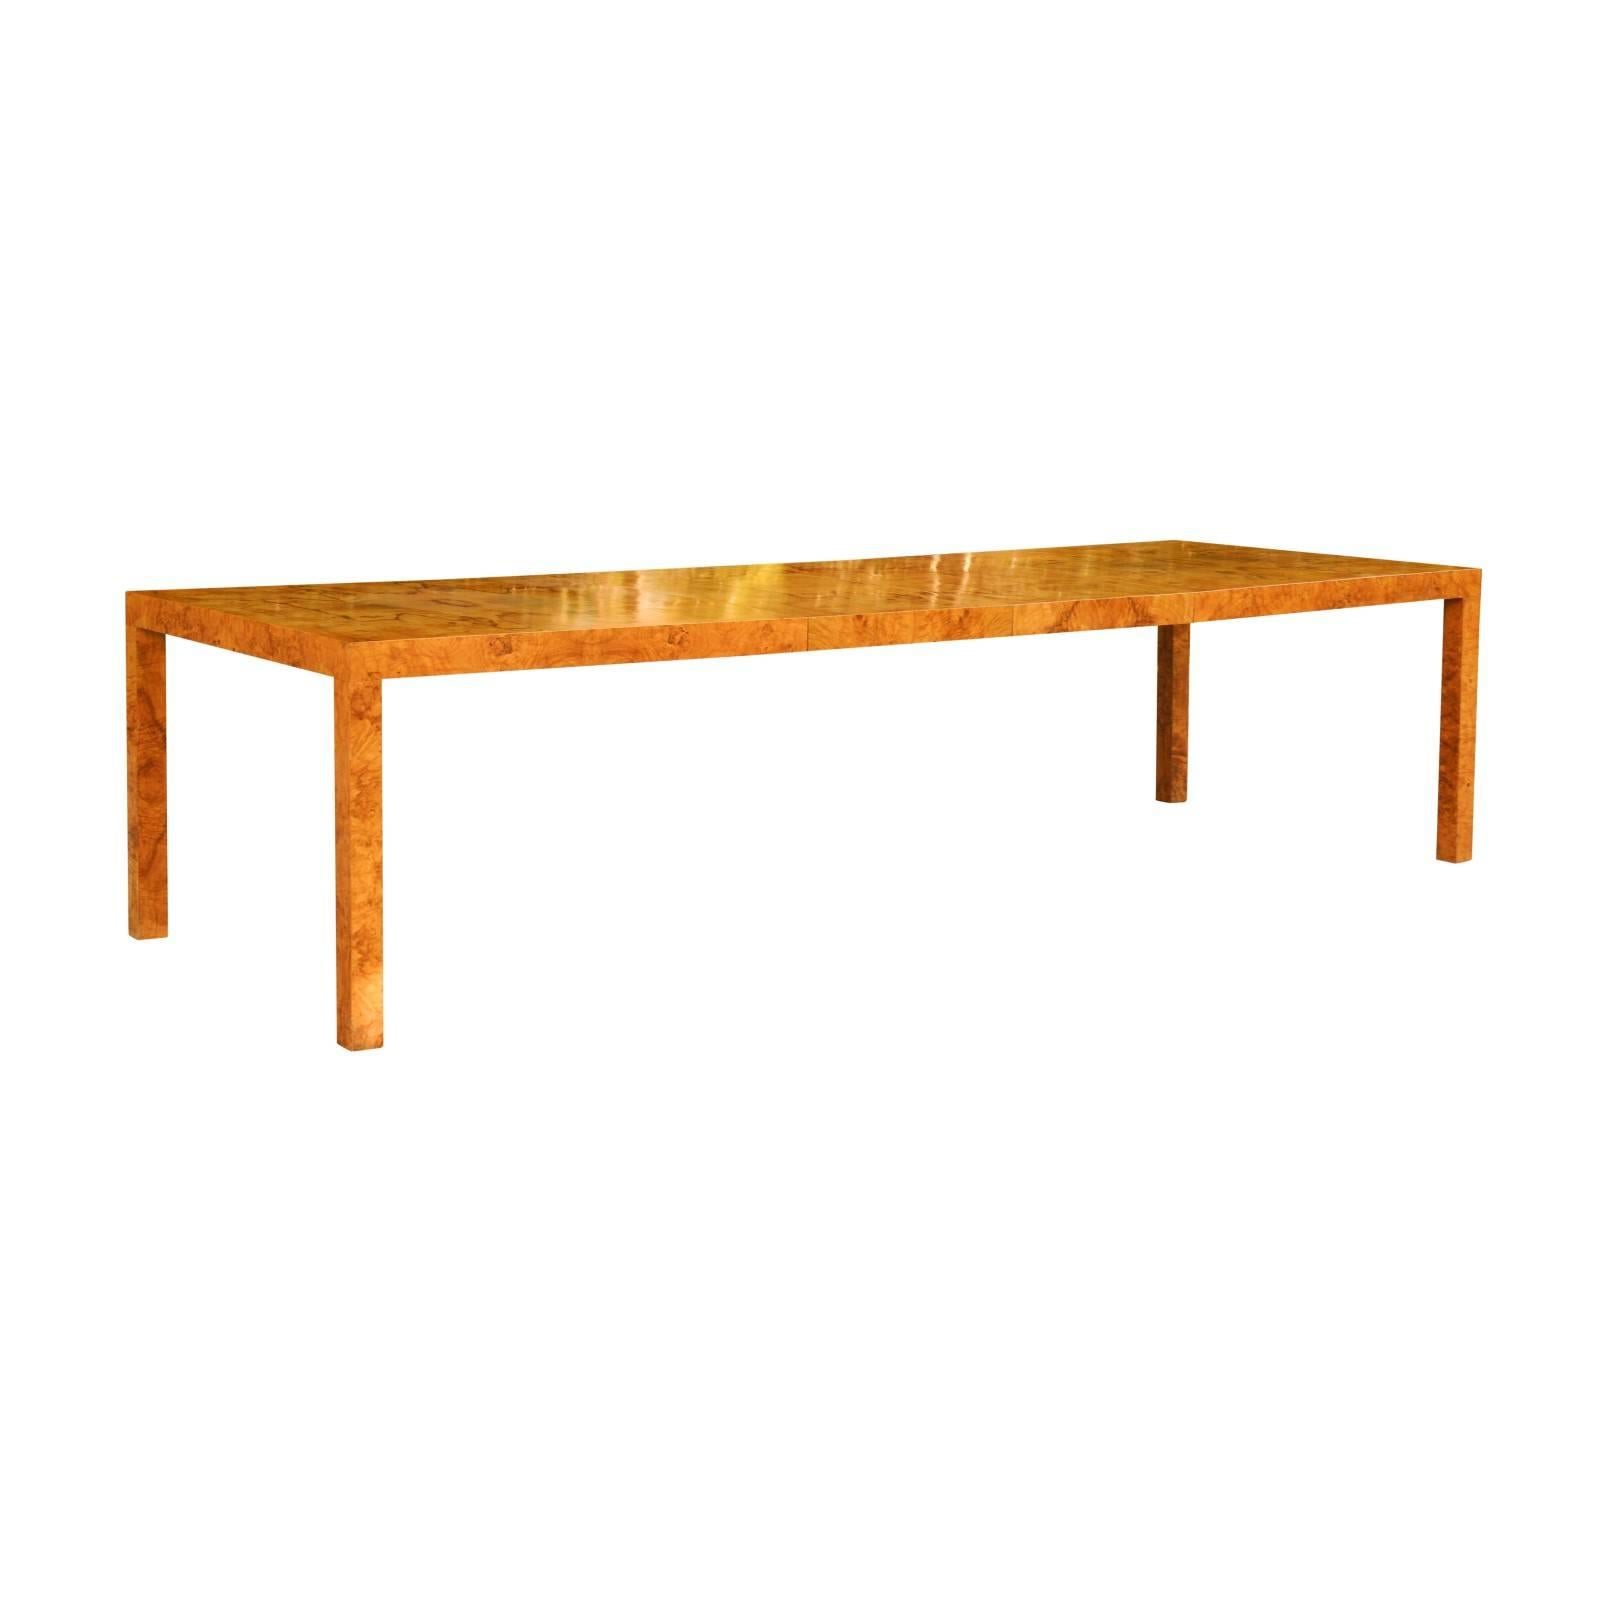 Magnificent Restored Butterfly Patterned Olivewood Dining Table by Milo Baughman